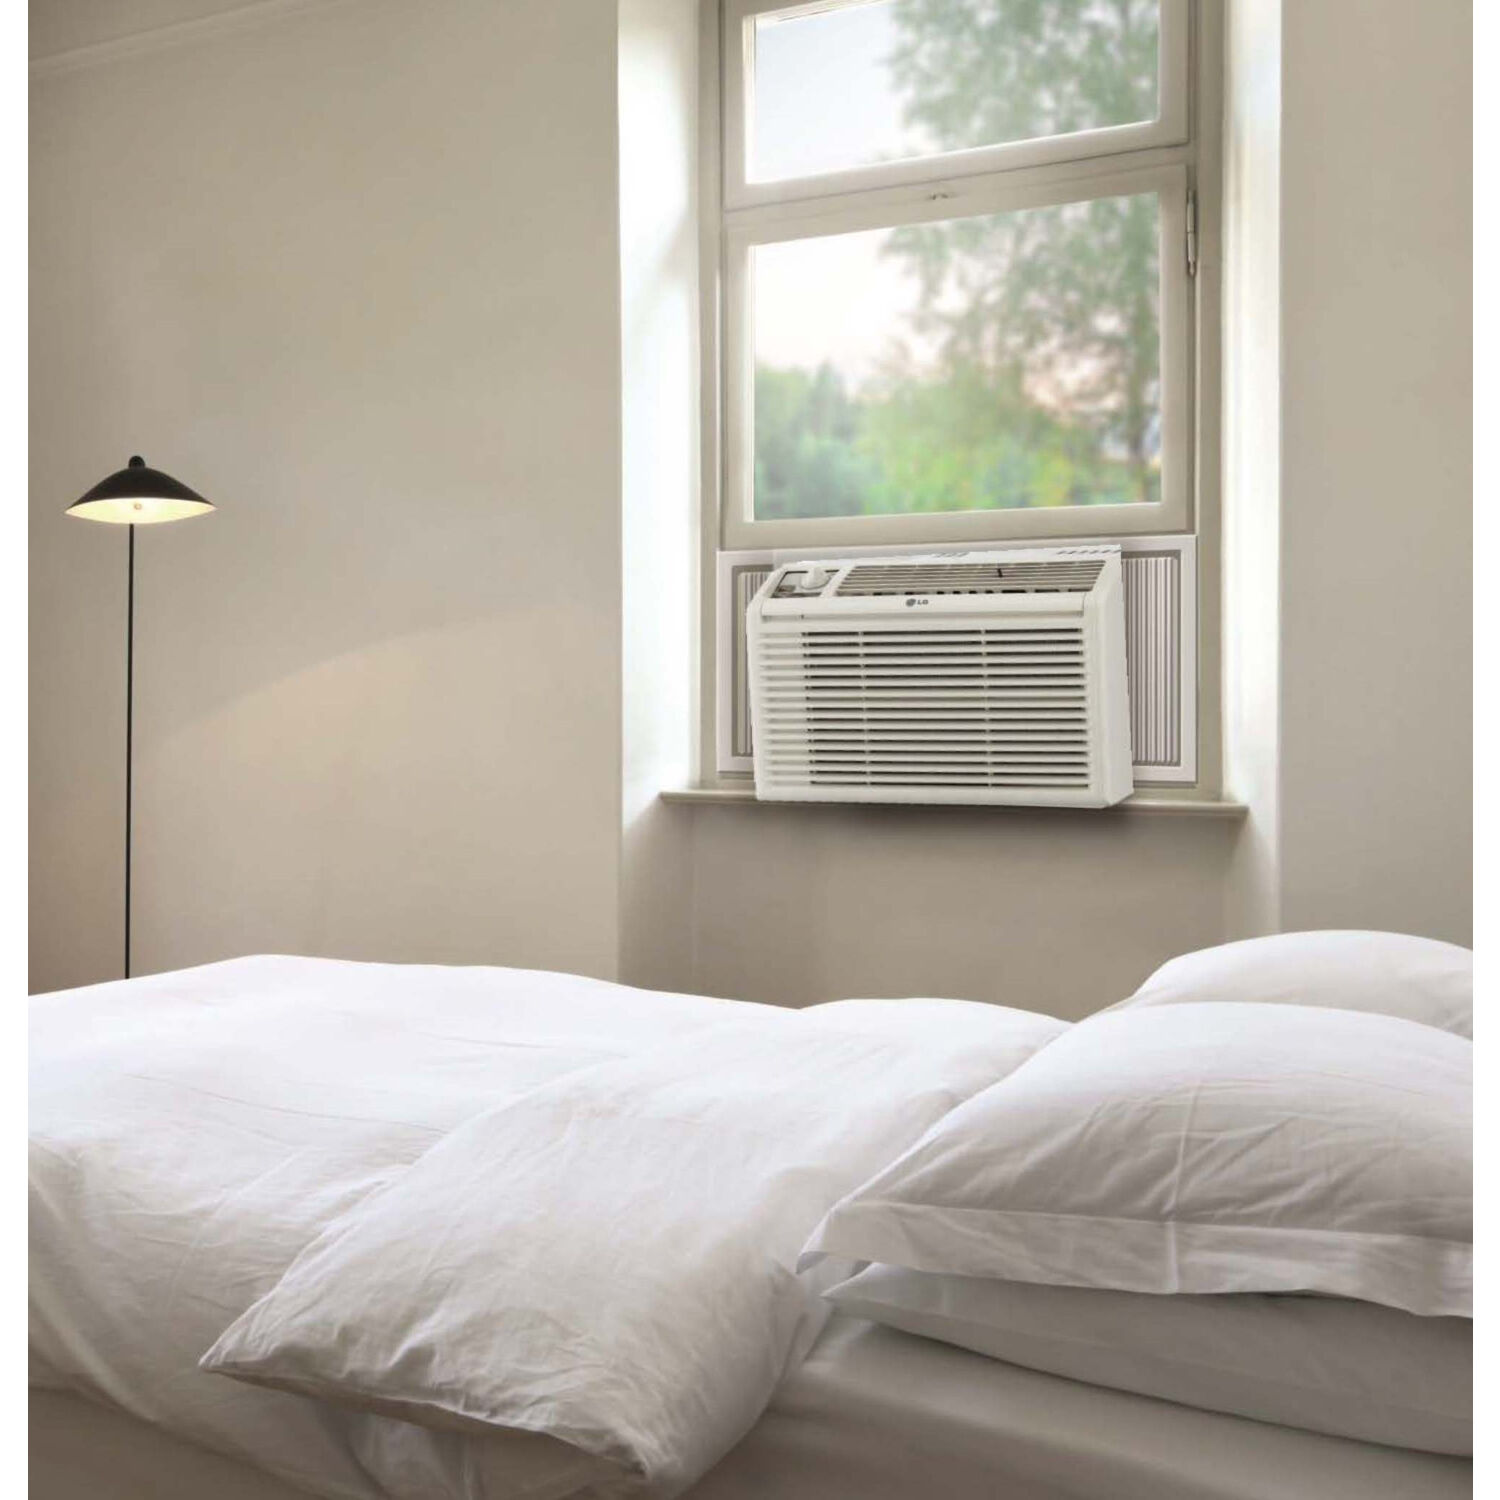 LG 5,000 115V BTU Window Air Conditioner, Cools 150 Sq.Ft. (10' x 15' Room Size) - image 5 of 10